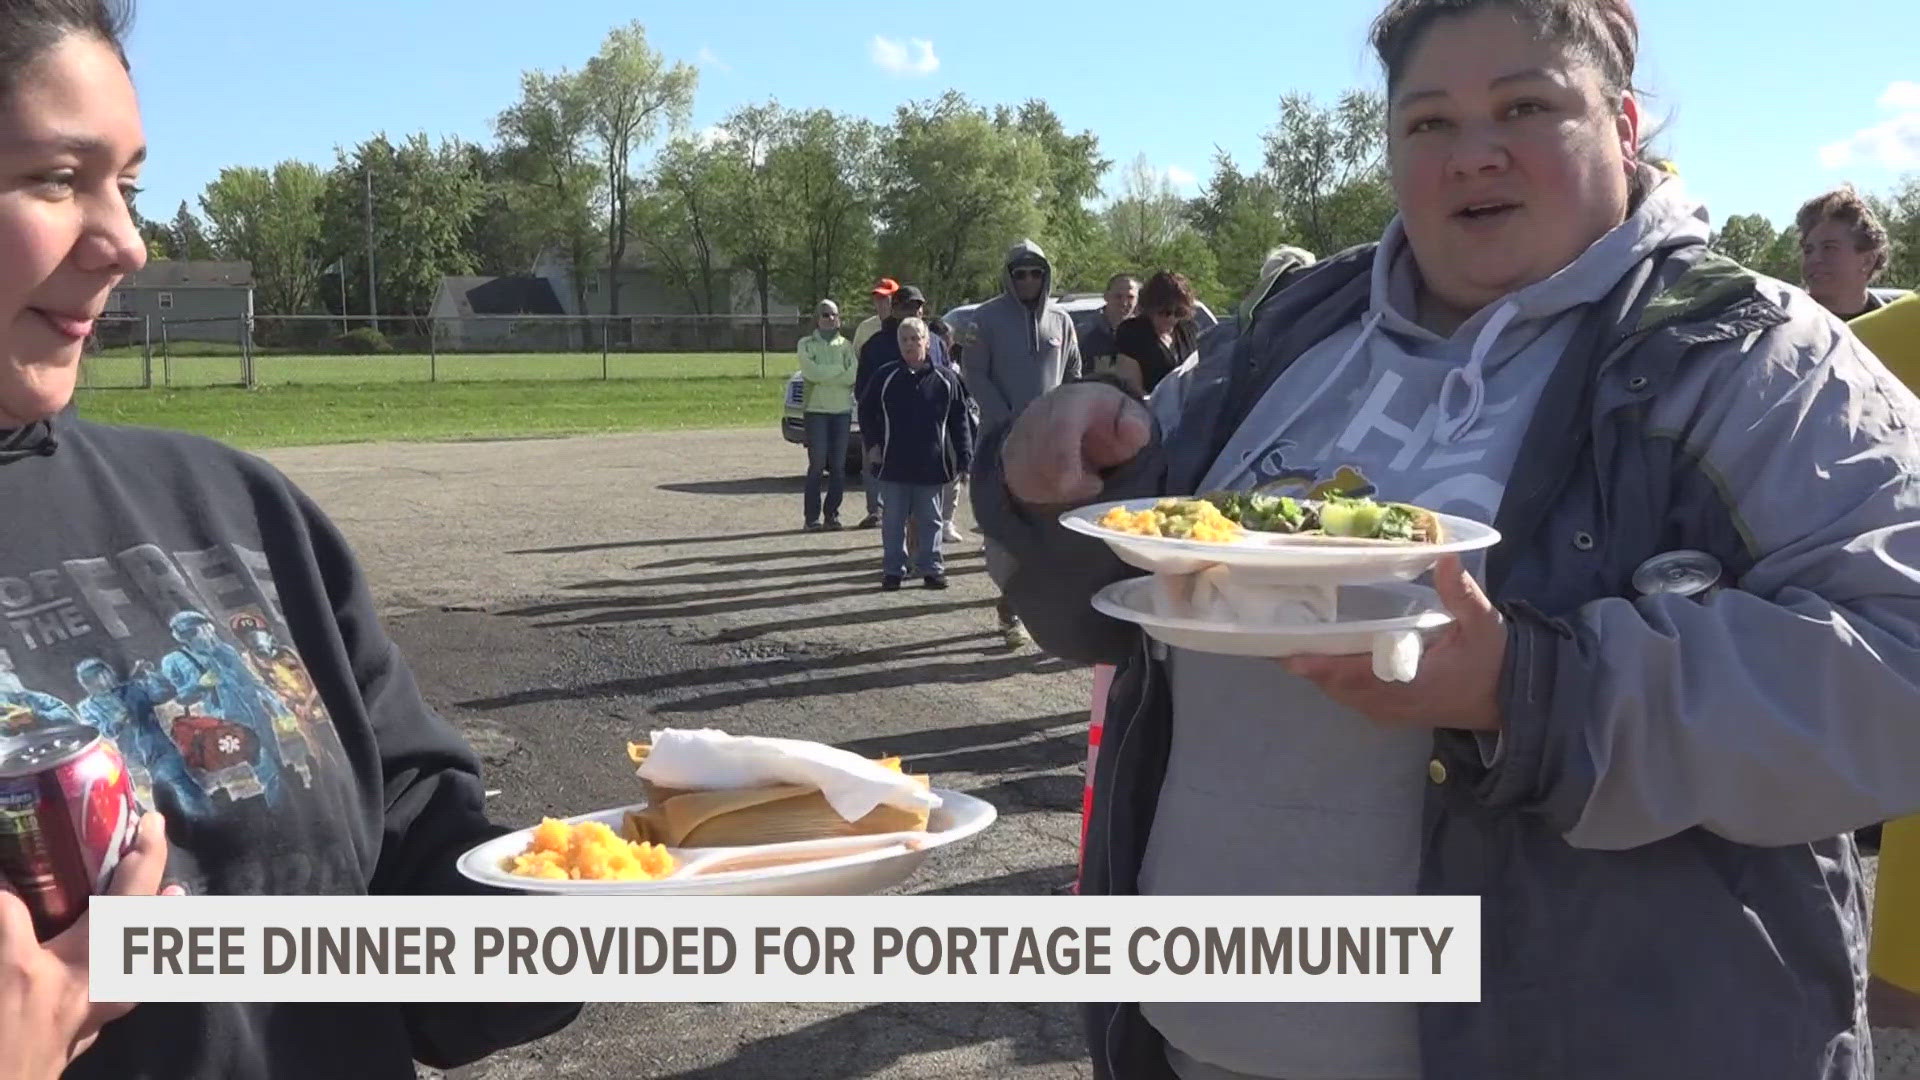 Residents are thankful for the free meals as the community begins to move forward.